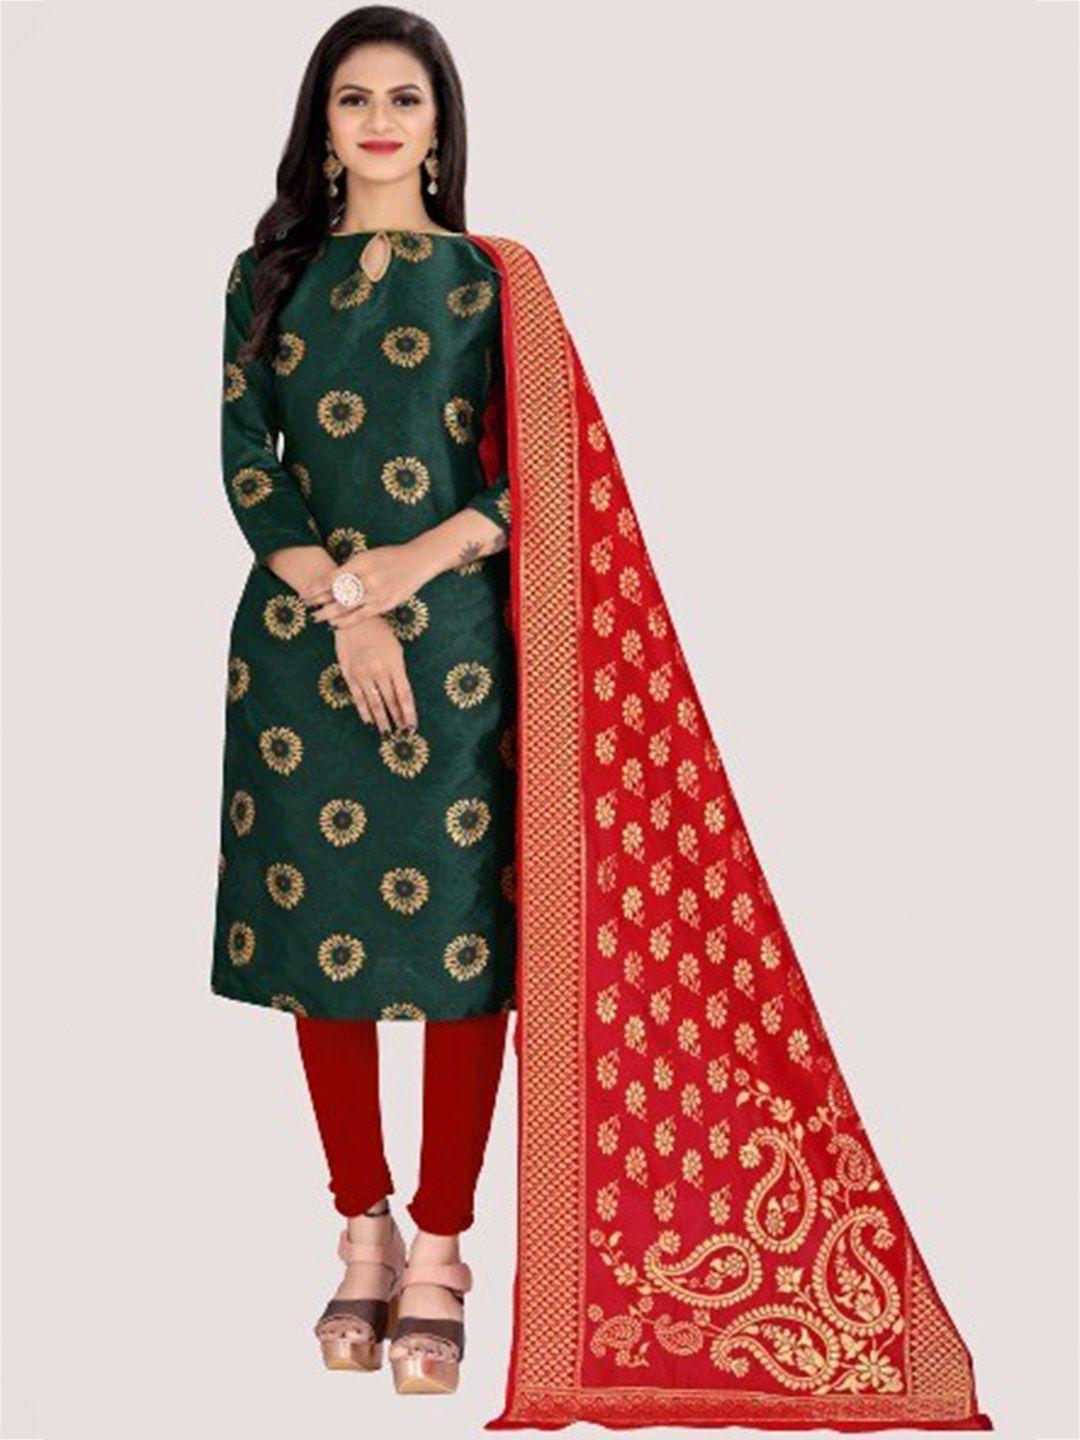 morly women  green & red dupion silk unstitched dress material